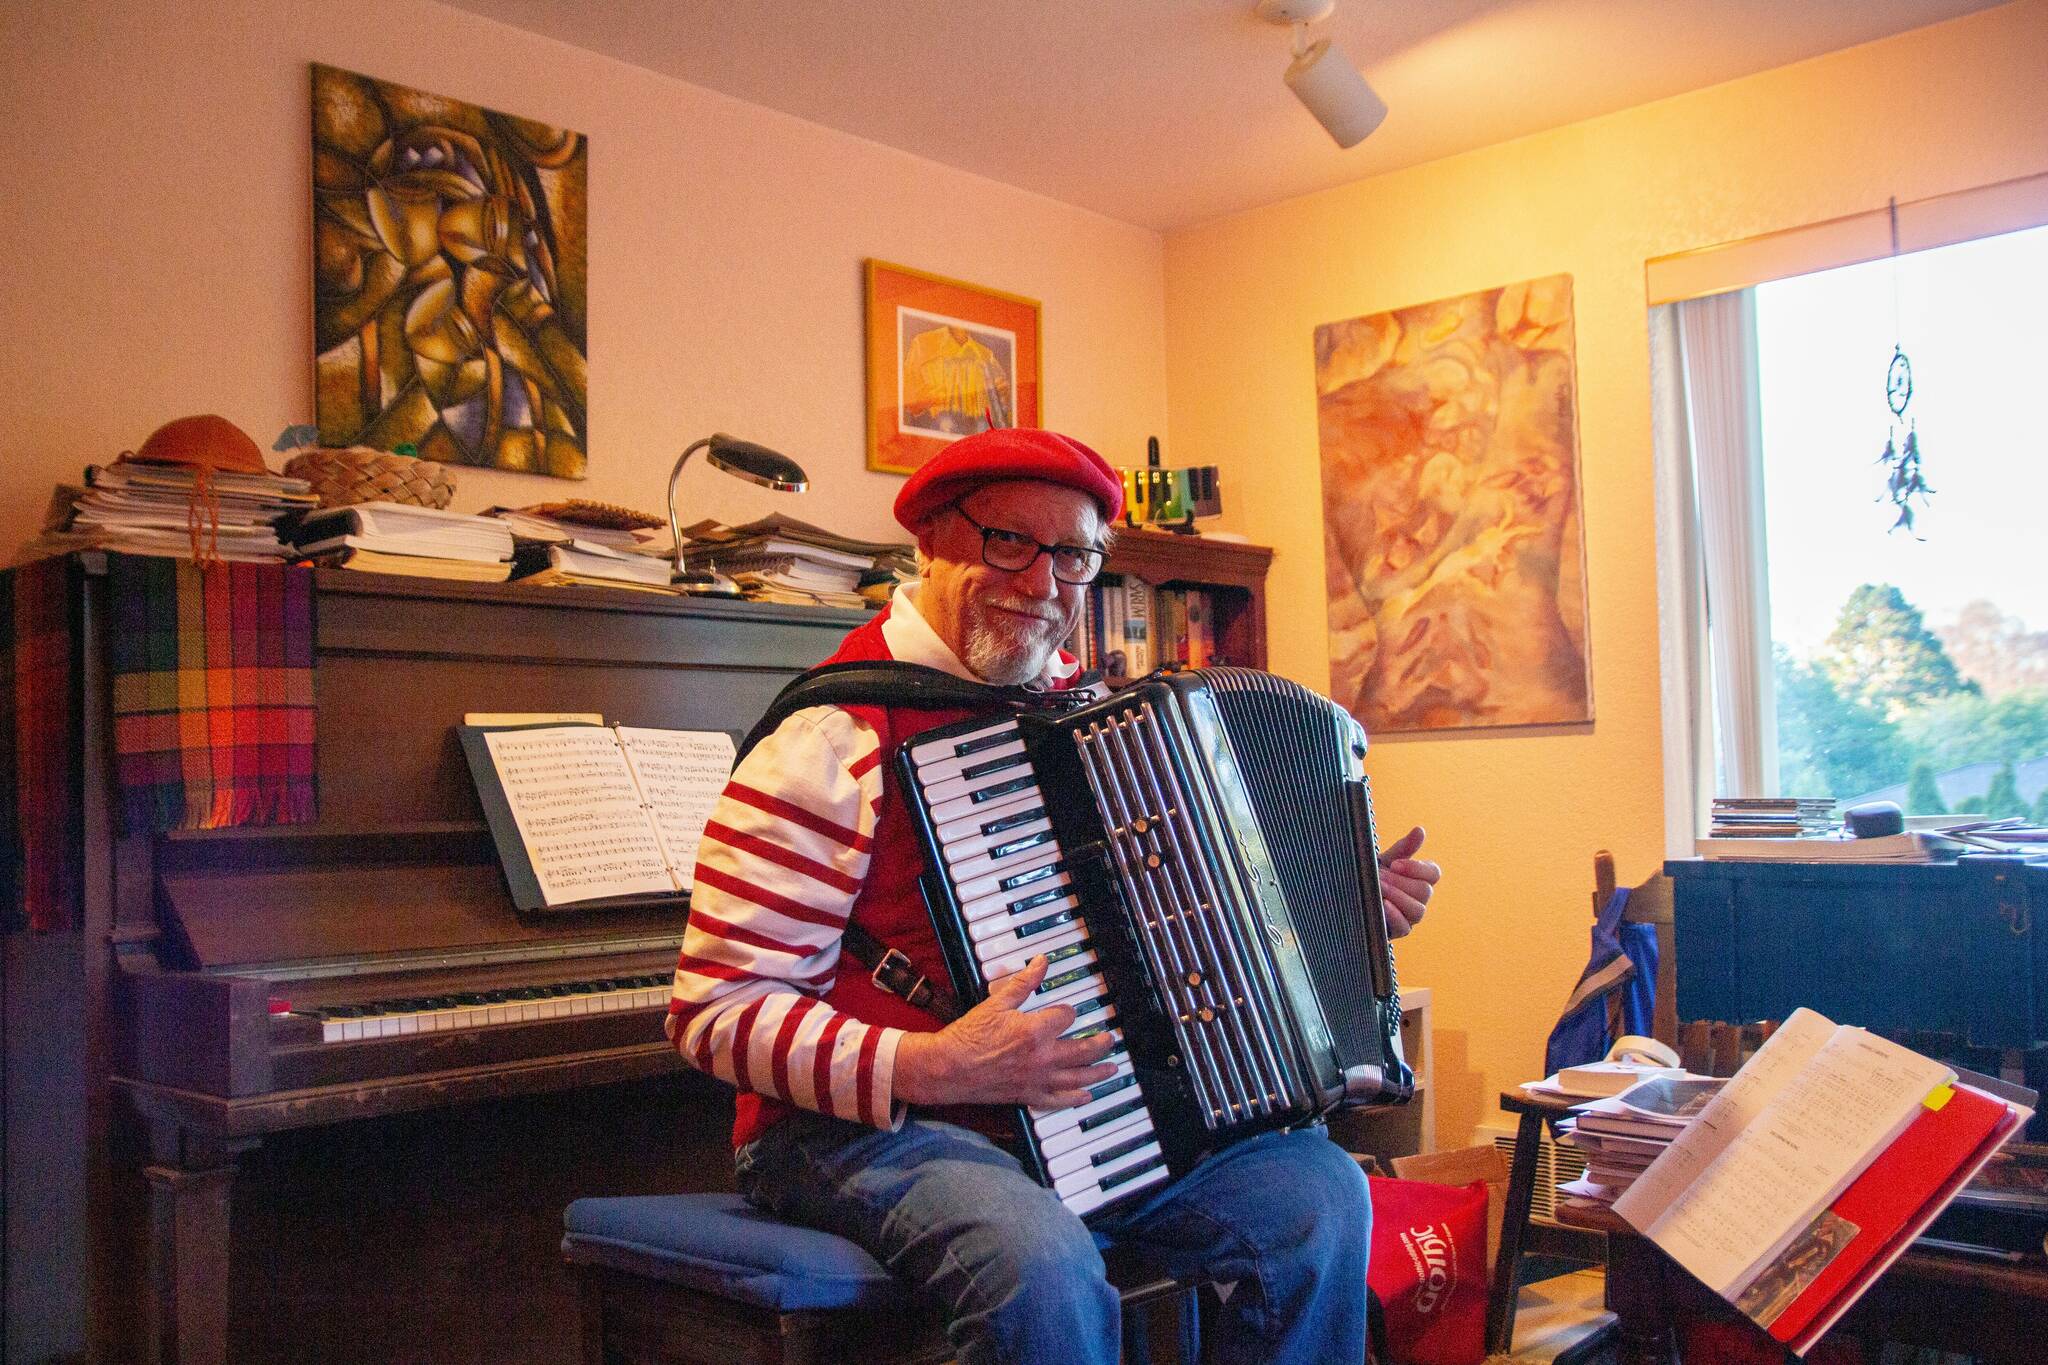 David Locke plays the accordion at his house in Langley. One of the most common compliments he hears is that his performances feel like Paris. (Photo by Luisa Loi)